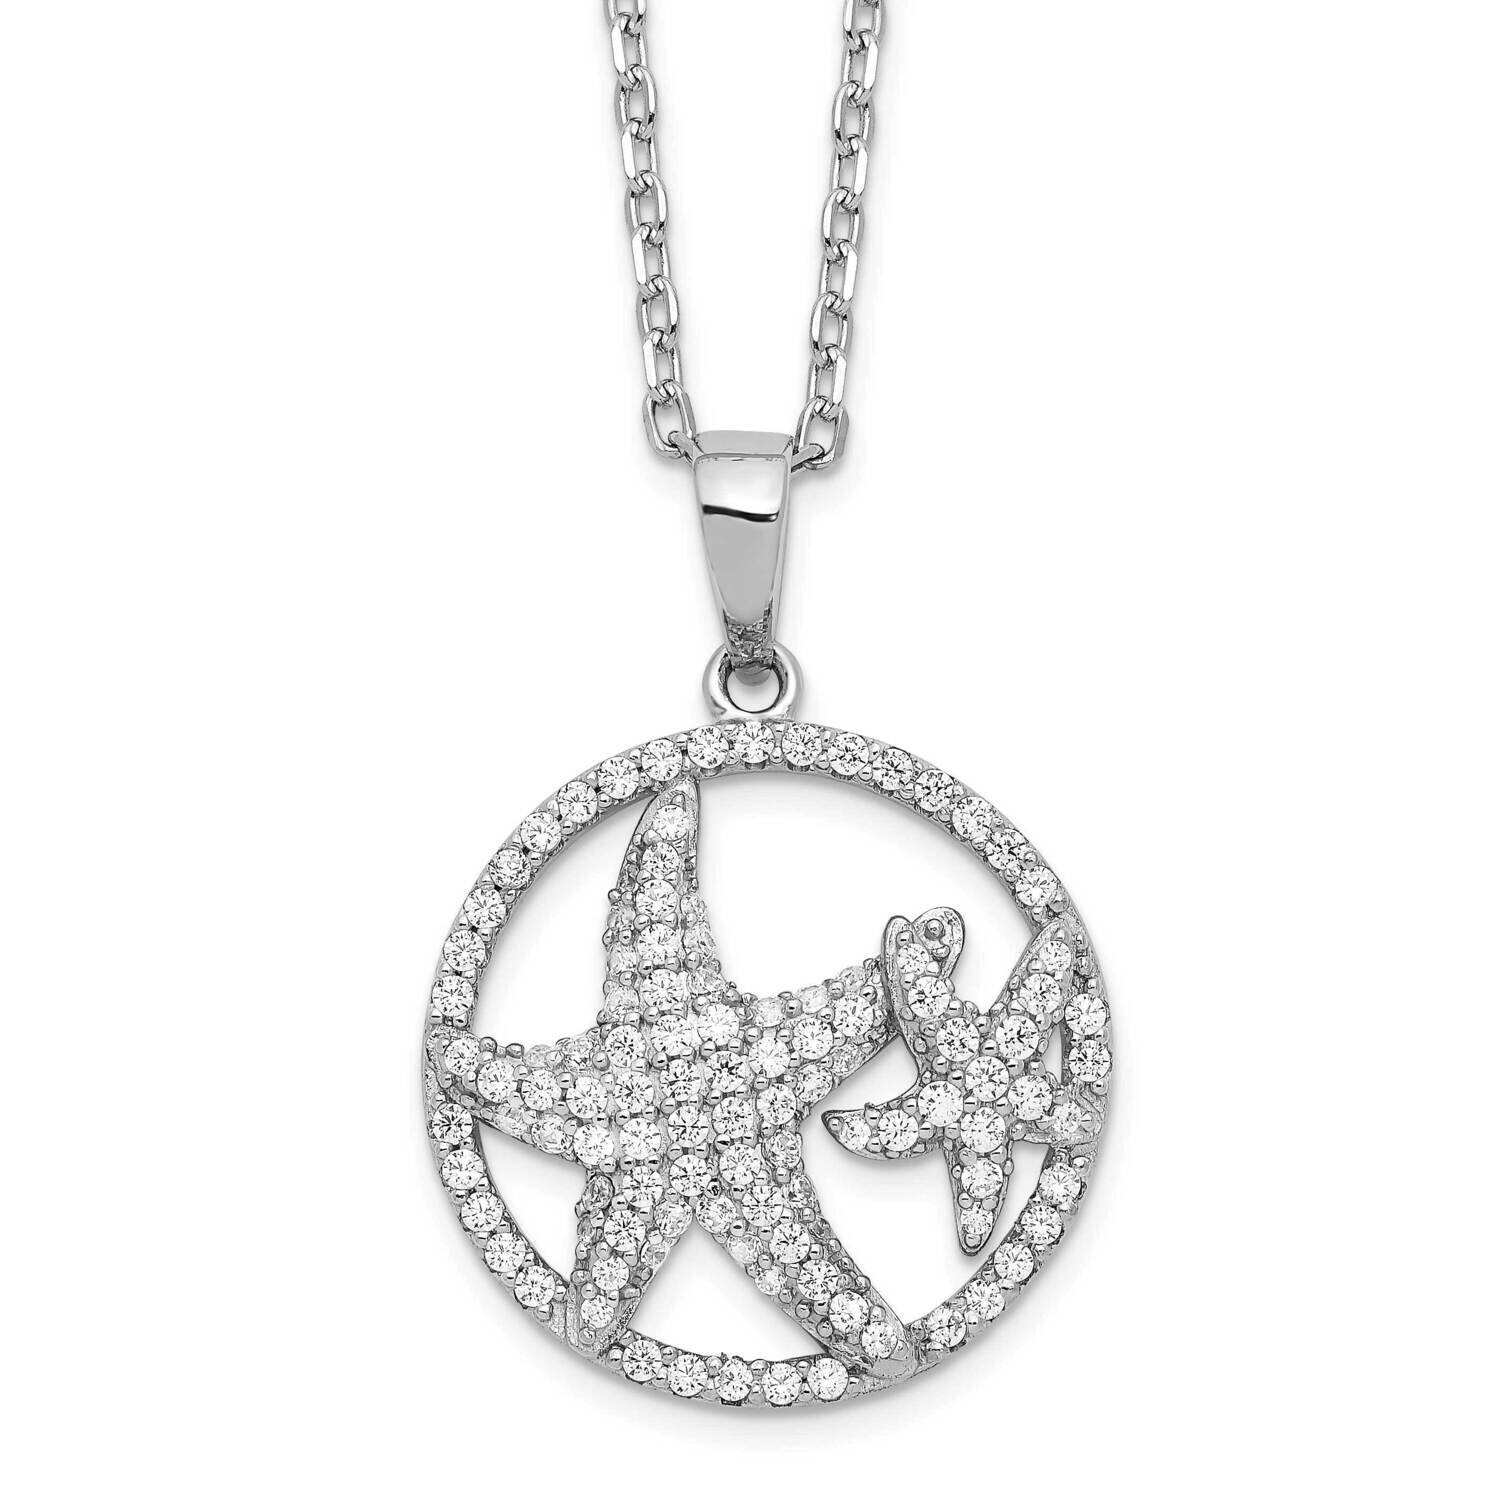 Cheryl M Rhodium-Plated CZ Diamond with 2 Inch Ext. Starfish Necklace Sterling Silver QCM1544-16